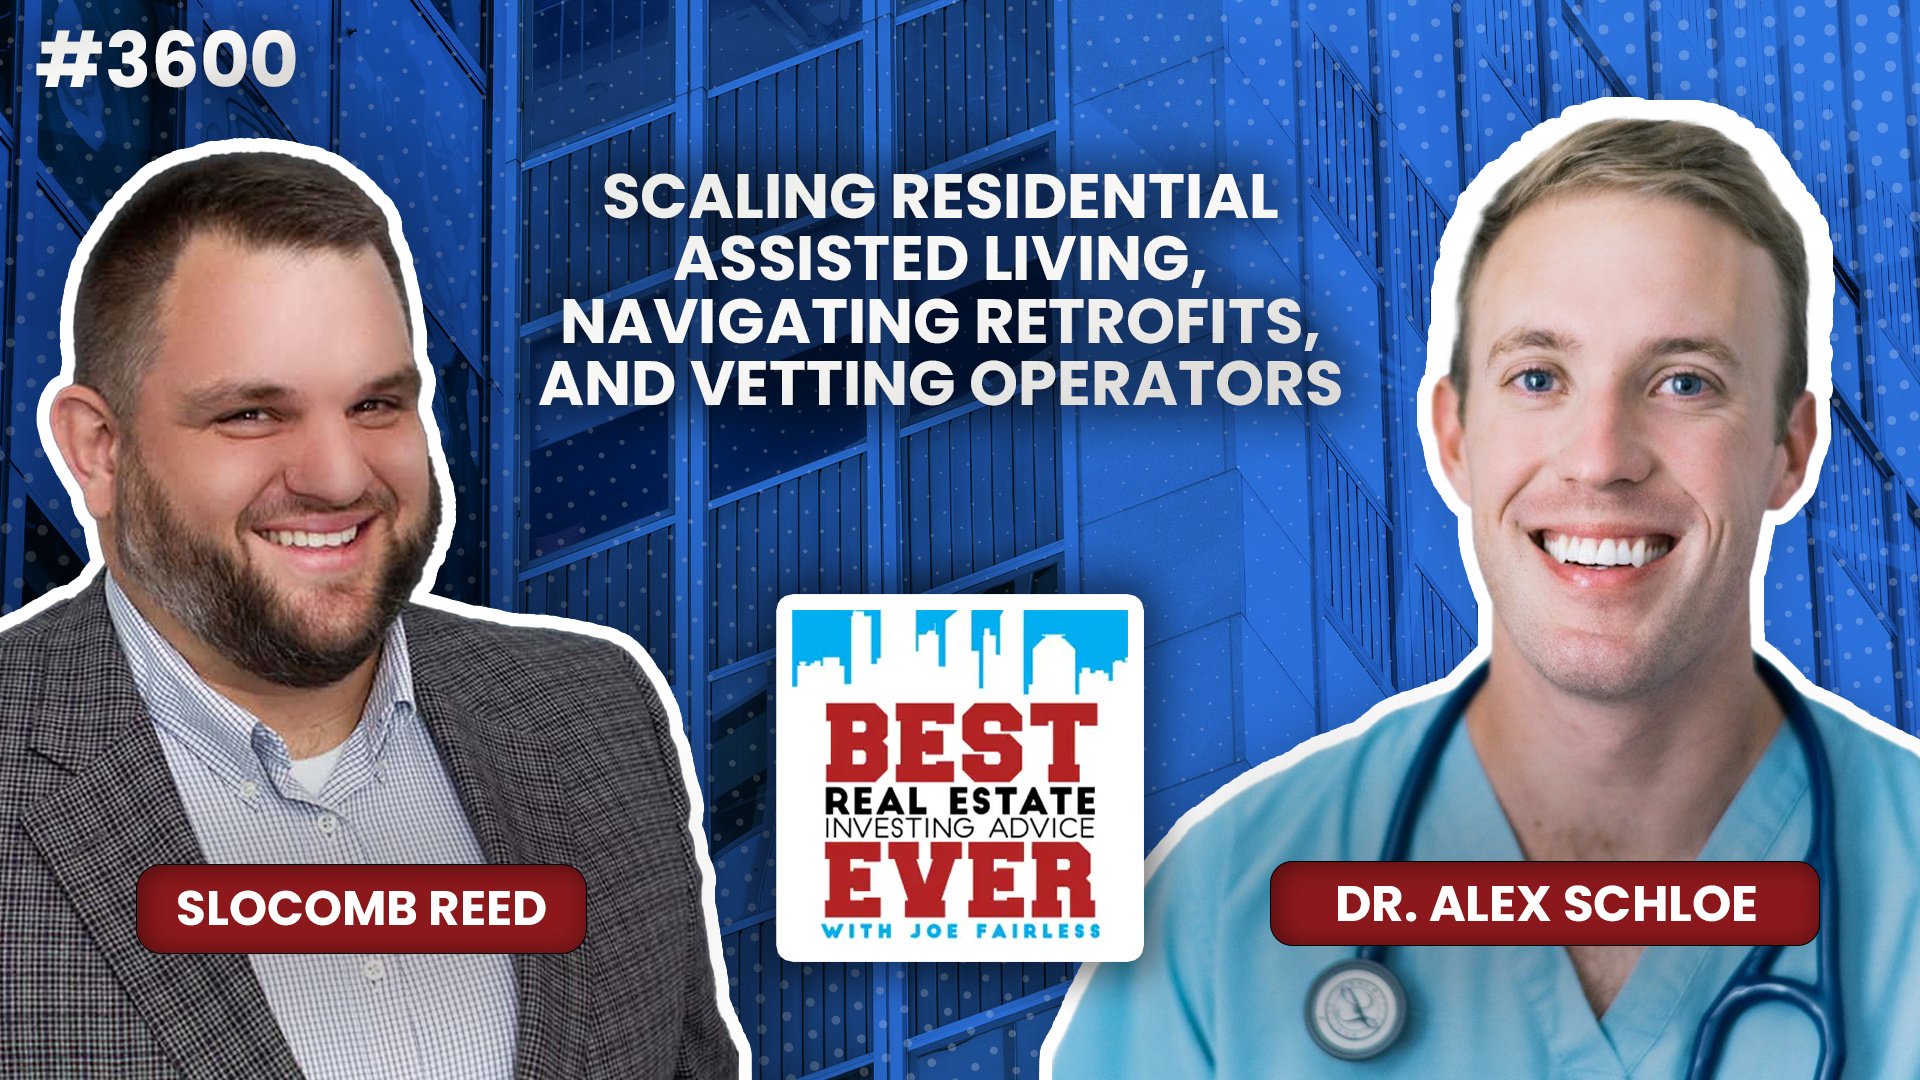 JF3600: Scaling Residential Assisted Living, Navigating Retrofits, and Vetting Operators ft. Dr. Alex Schloe